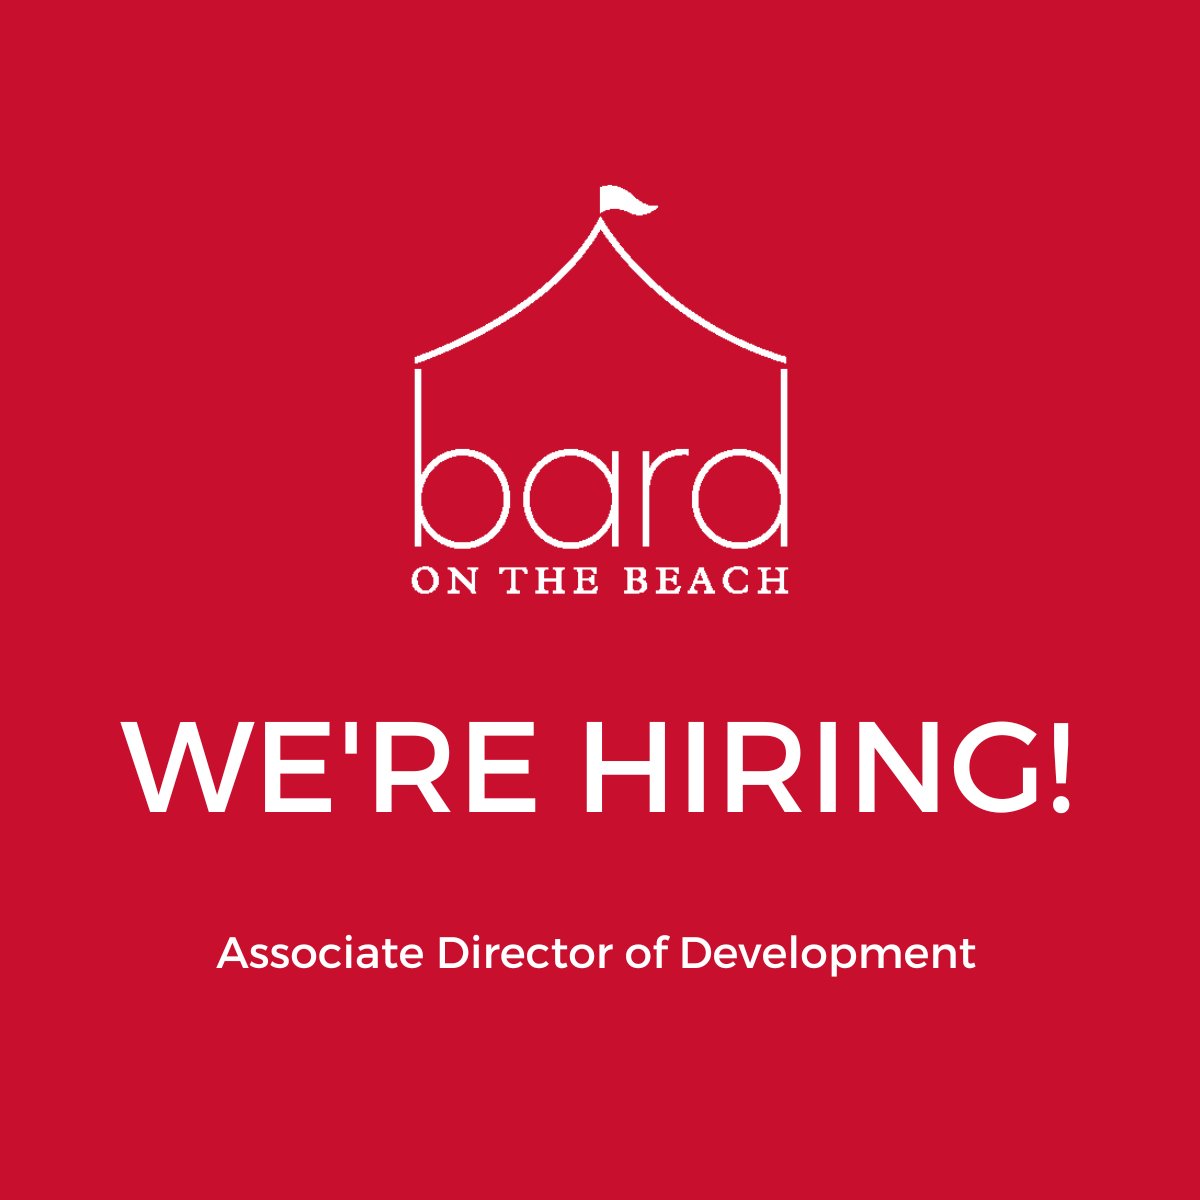 We are looking for an experienced growth-oriented individual to be involved in our corporate and foundation partnerships at Bard on the Beach.

Read more about this opportunity at the job posting on our website: bardonthebeach.org/employment-pos…

#yvrarts #yvrjobs